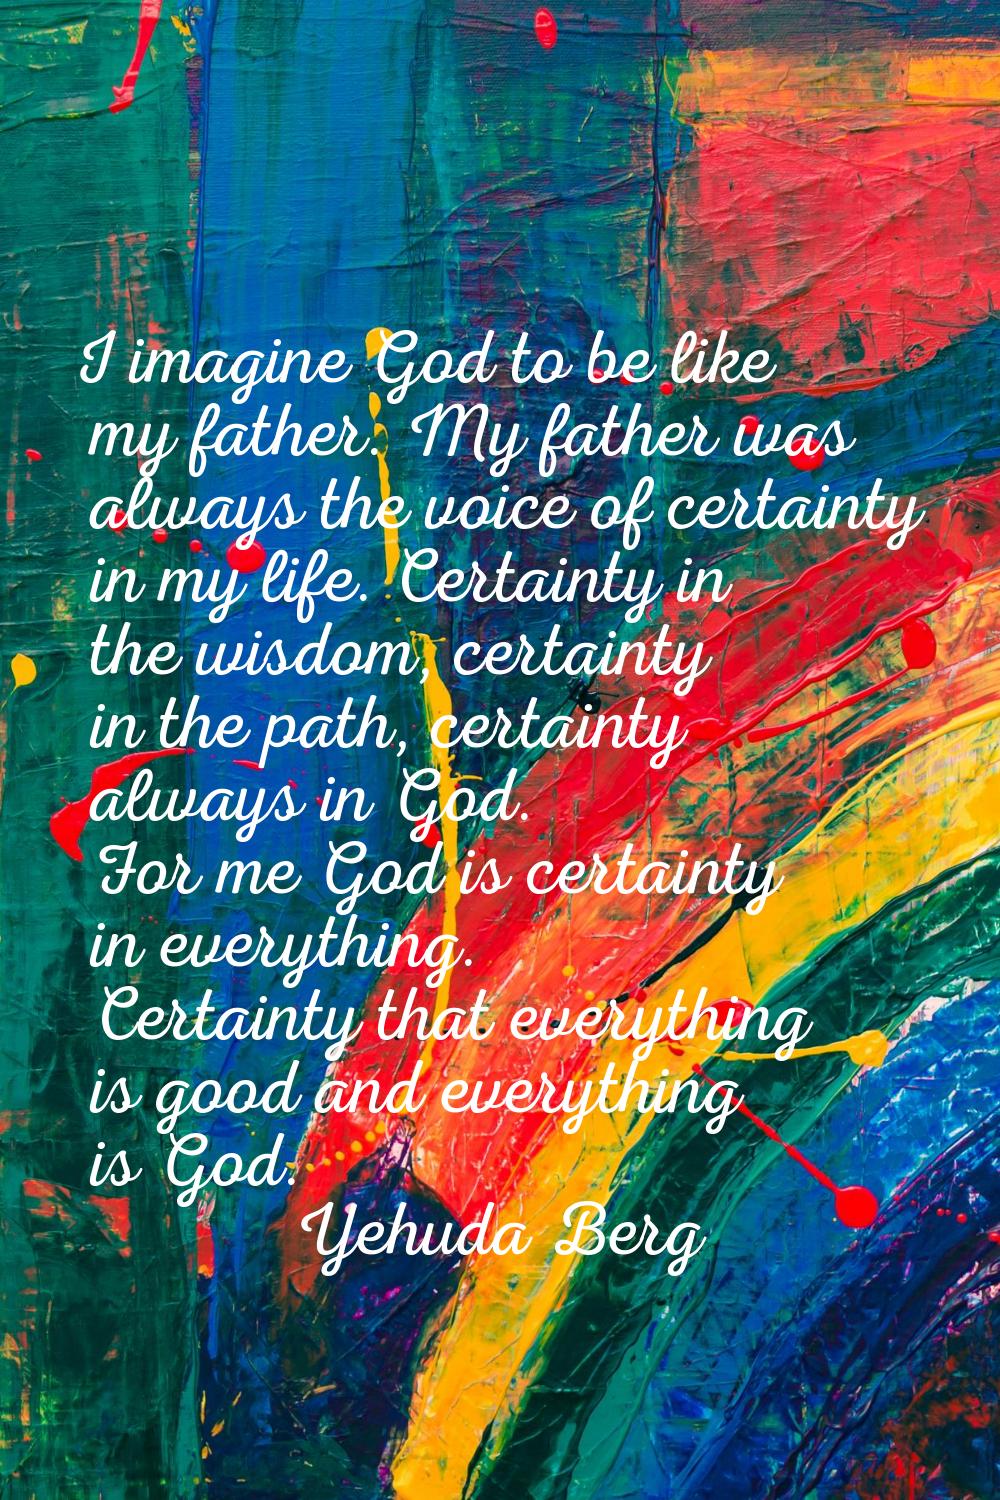 I imagine God to be like my father. My father was always the voice of certainty in my life. Certain